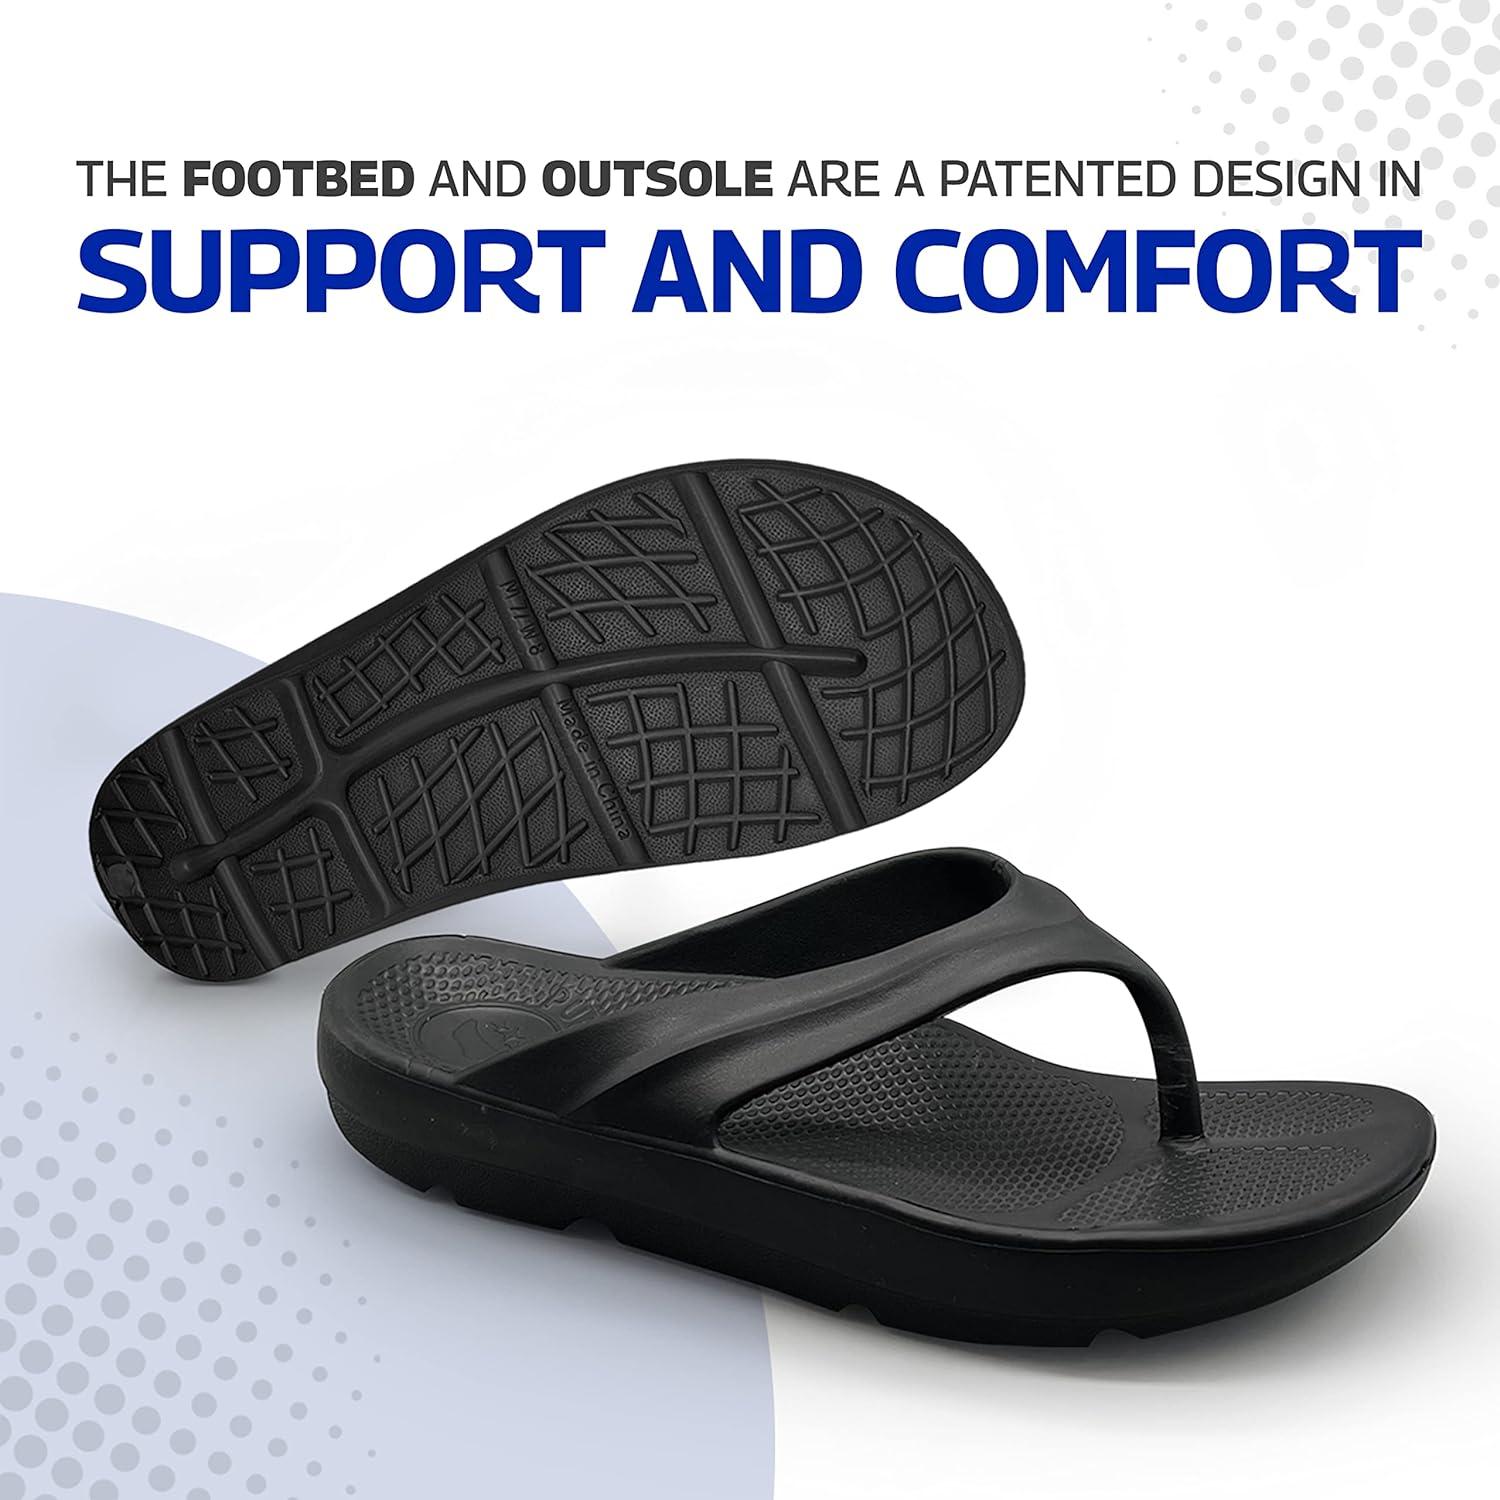 Pure Stride Therapeutic Flip Flops Orthotic Thong Sandals for